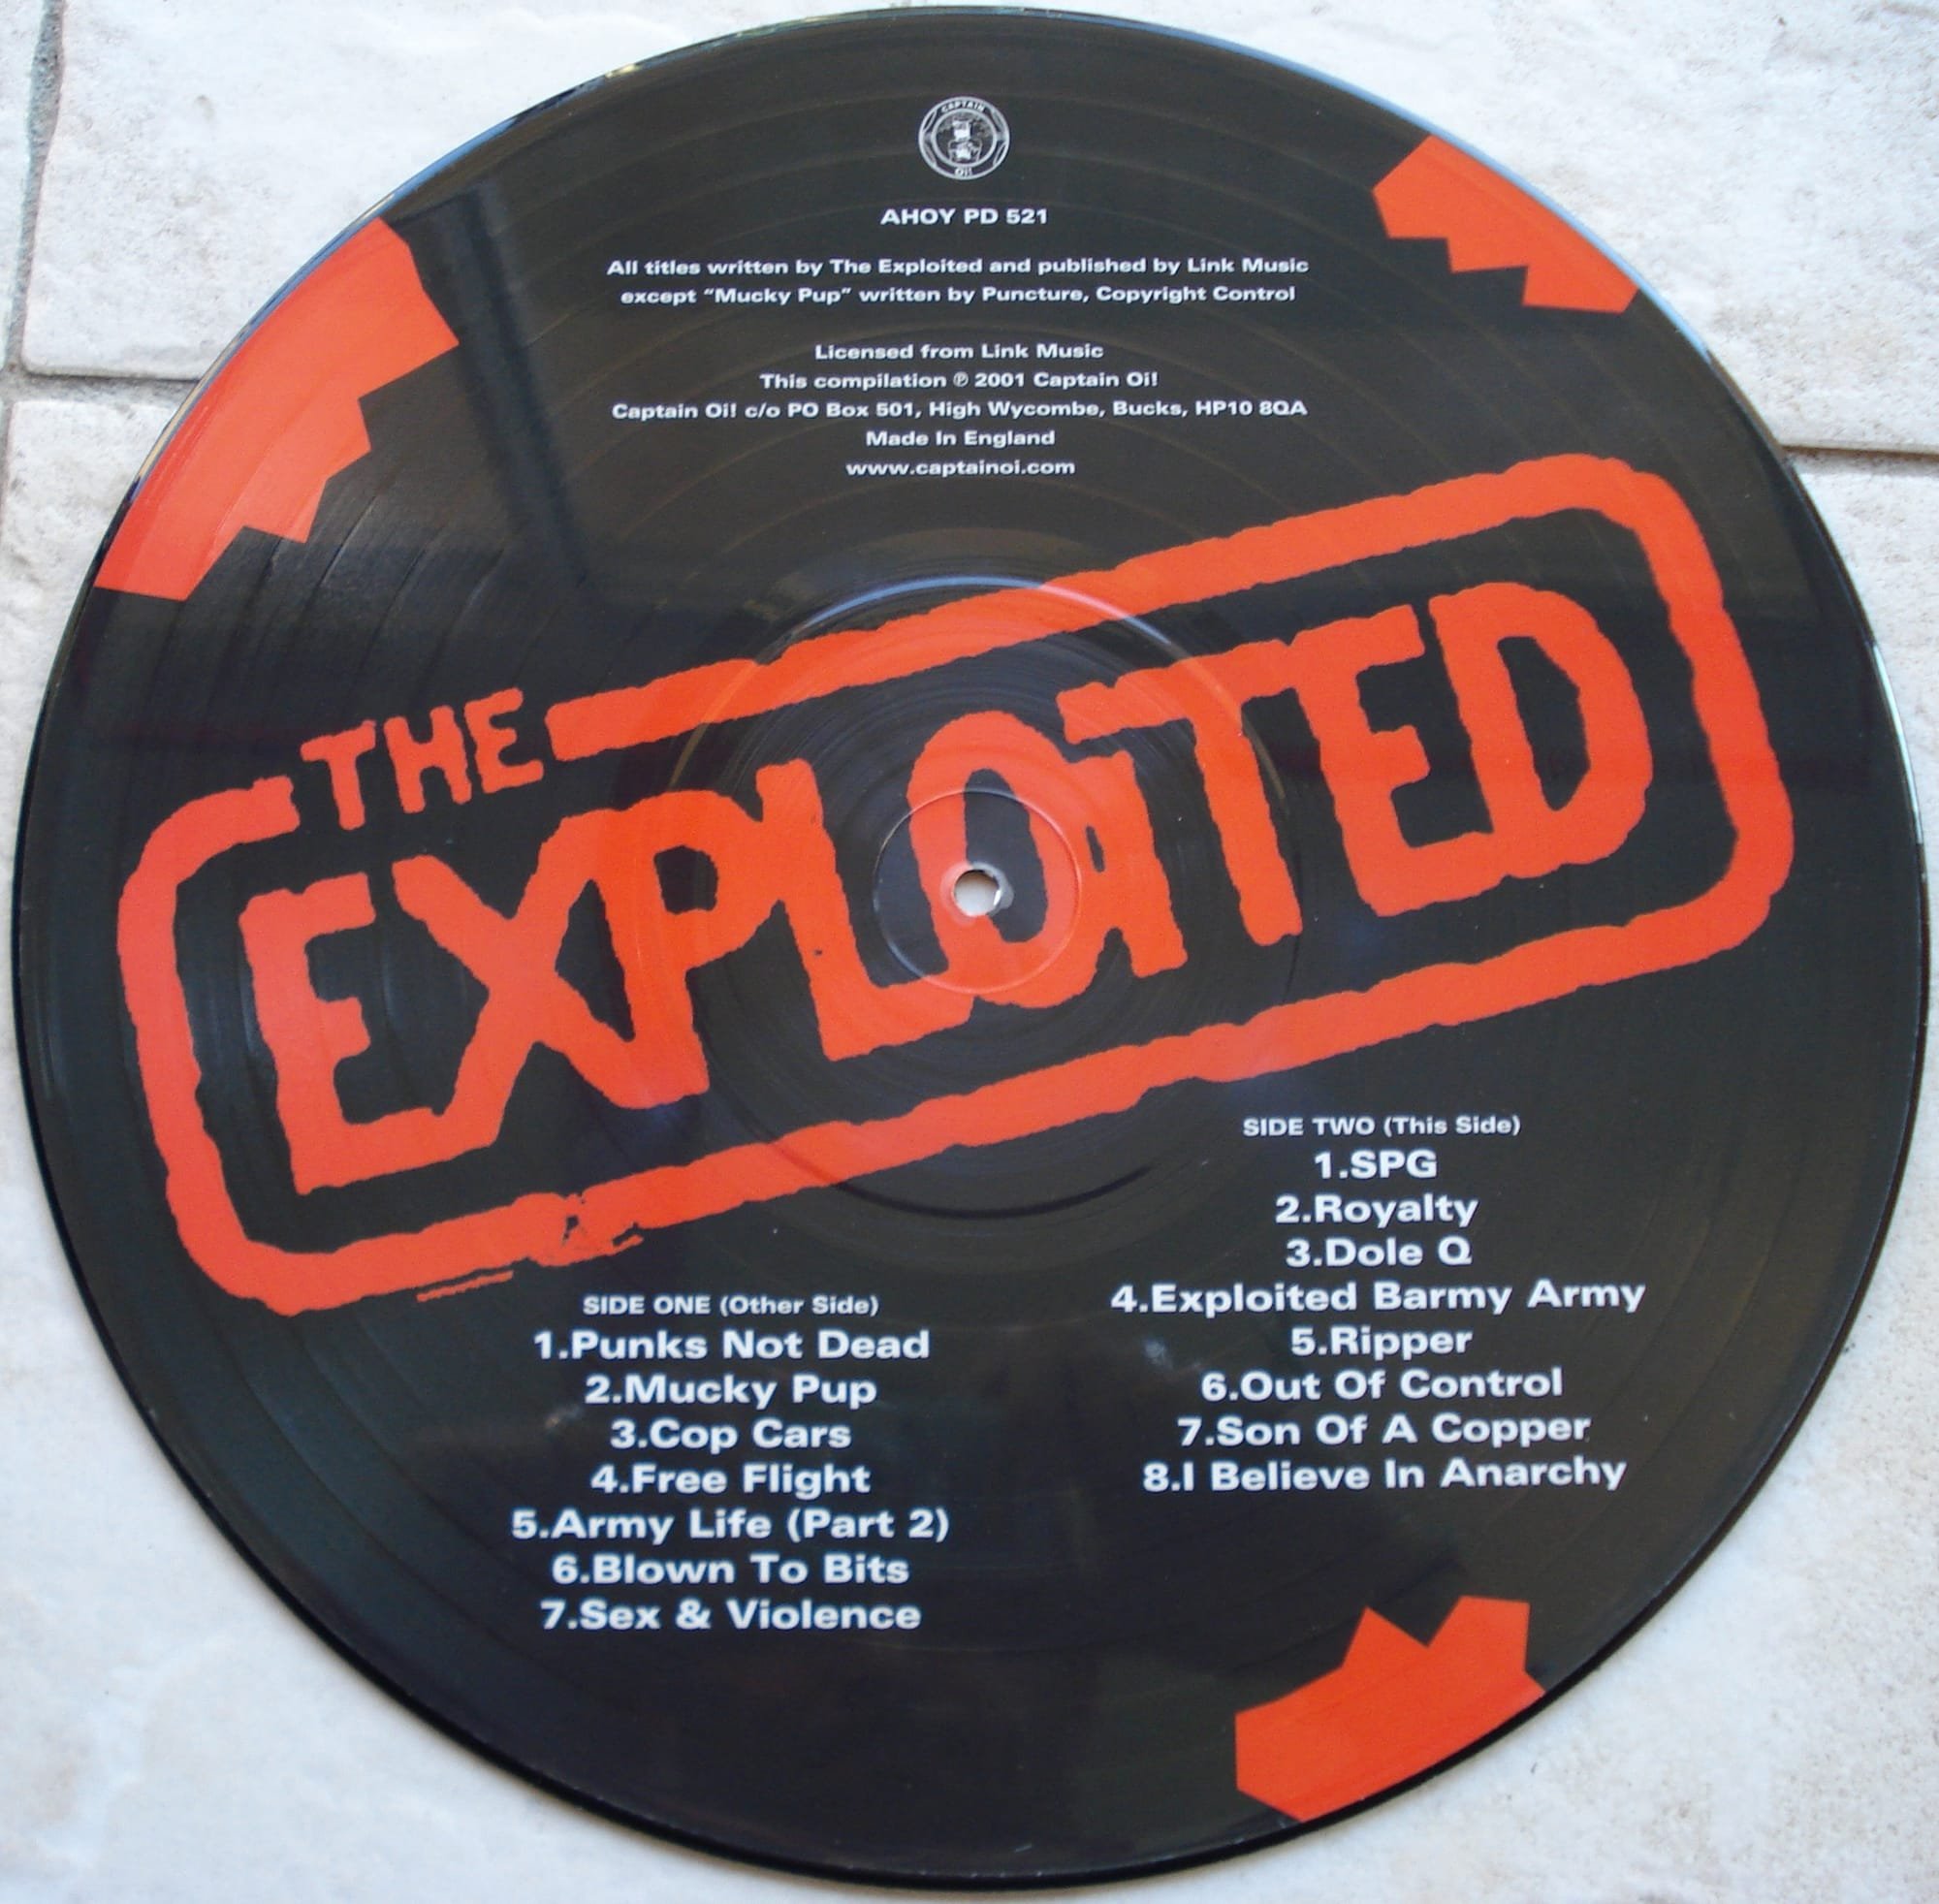 Vinyl 12 / 33 tours - THE EXPLOITED collection